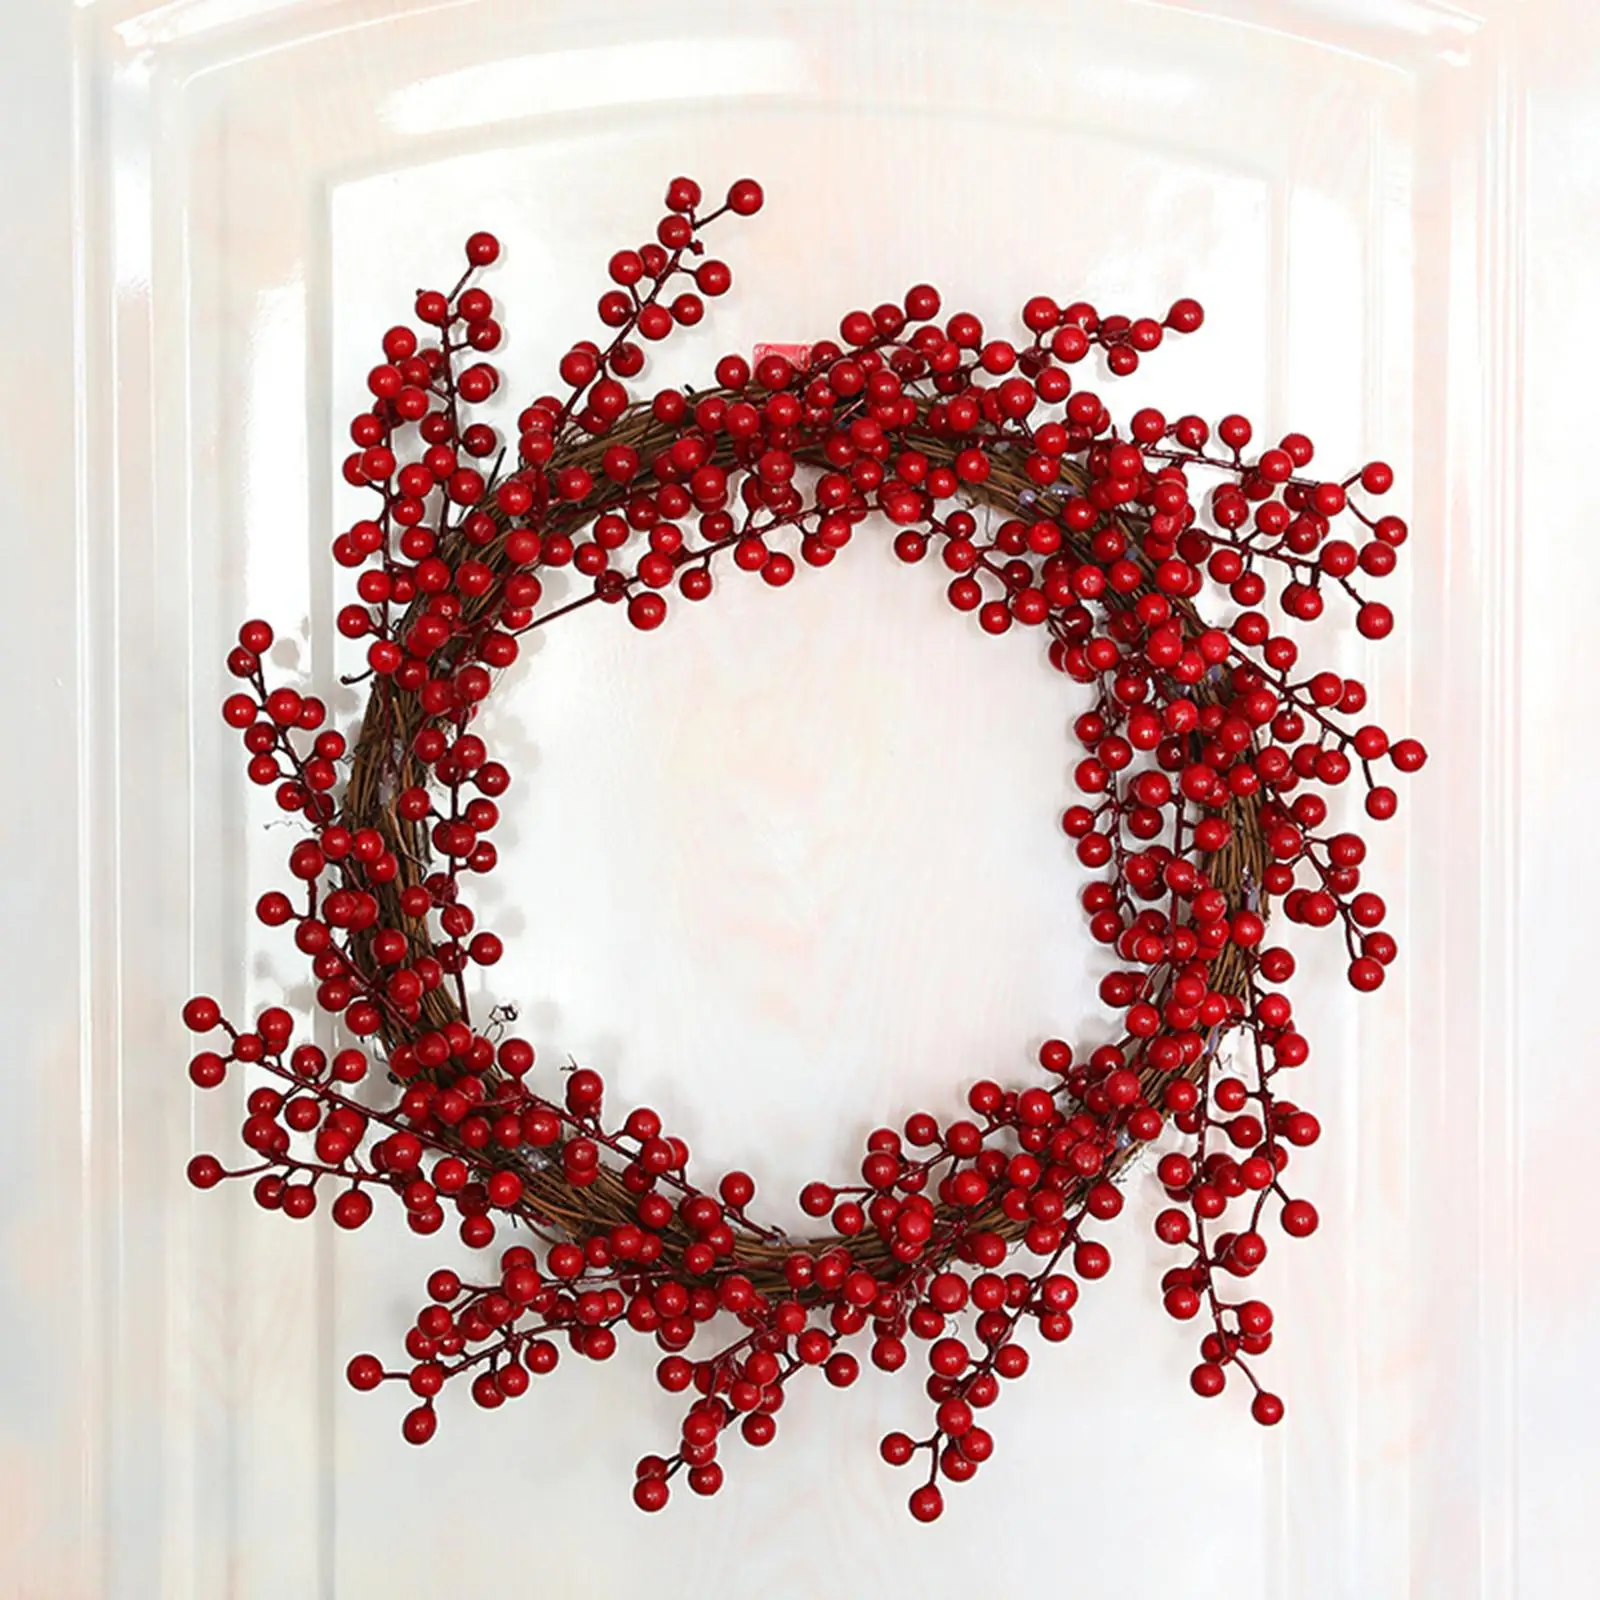 Christmas Wreath Realistic Decorative Front Door Wreath Christmas Decoration Garland for Wall Indoor Outdoor Home Office Wedding